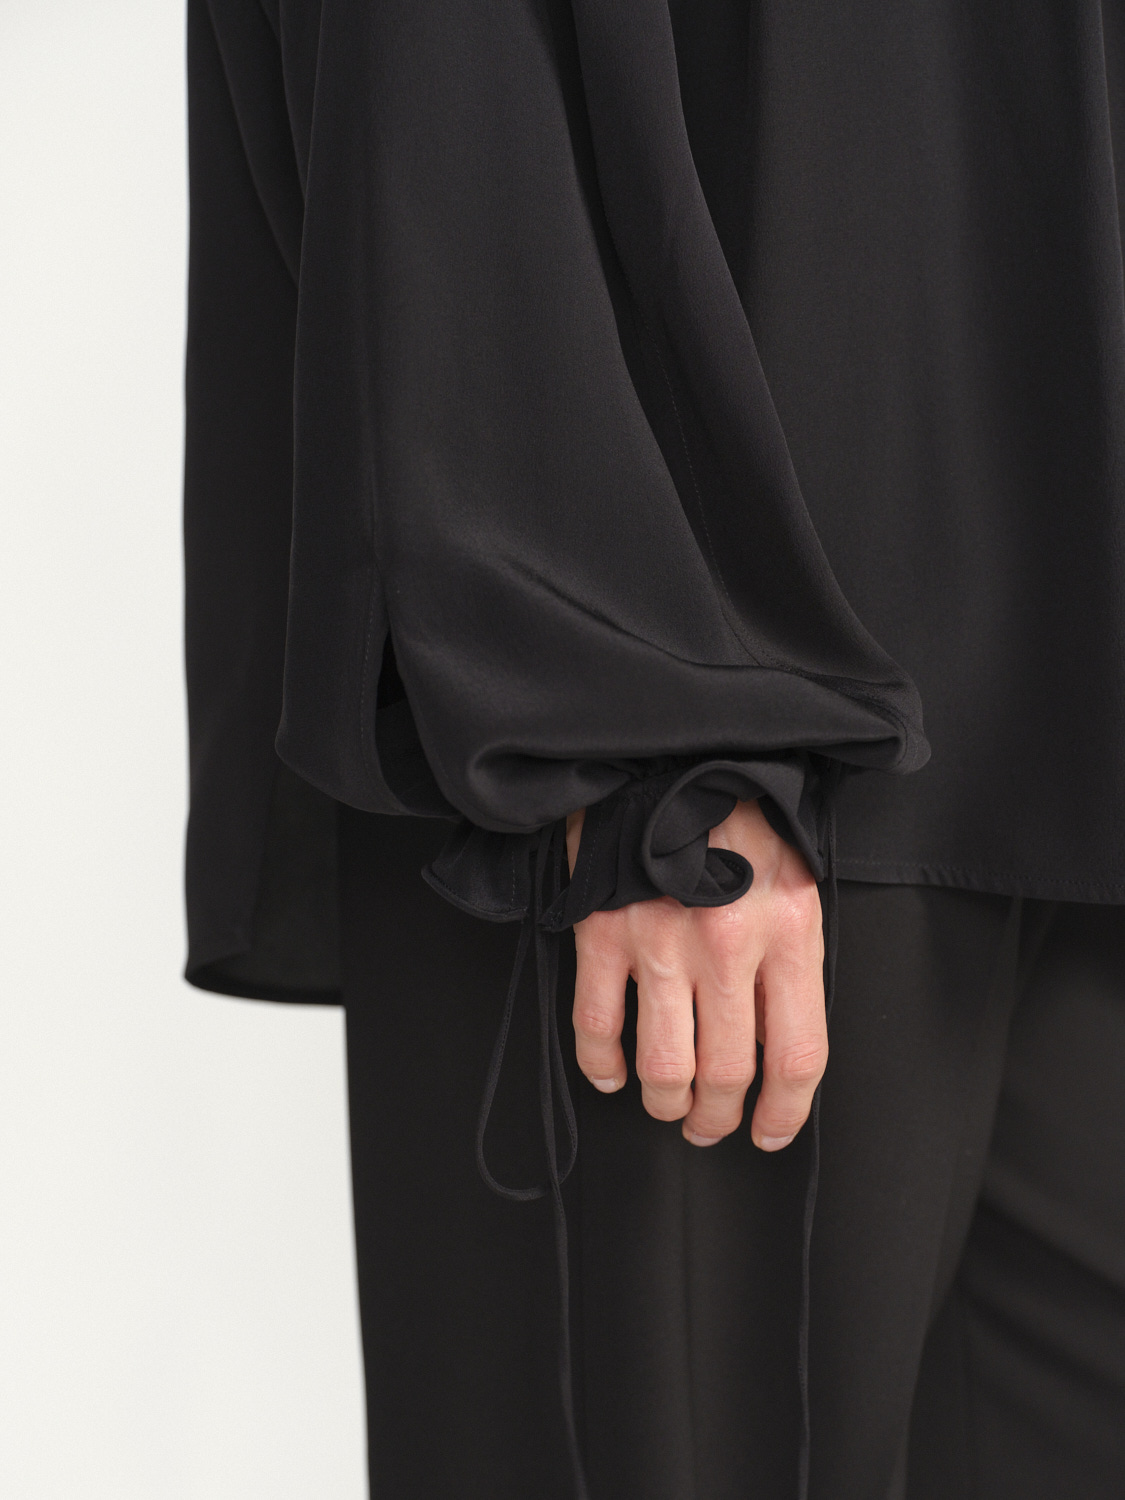 Victoria Beckham Ruched Detail Blouse - Long Sleeve Blouse with Ruched Details made of Silk black 36